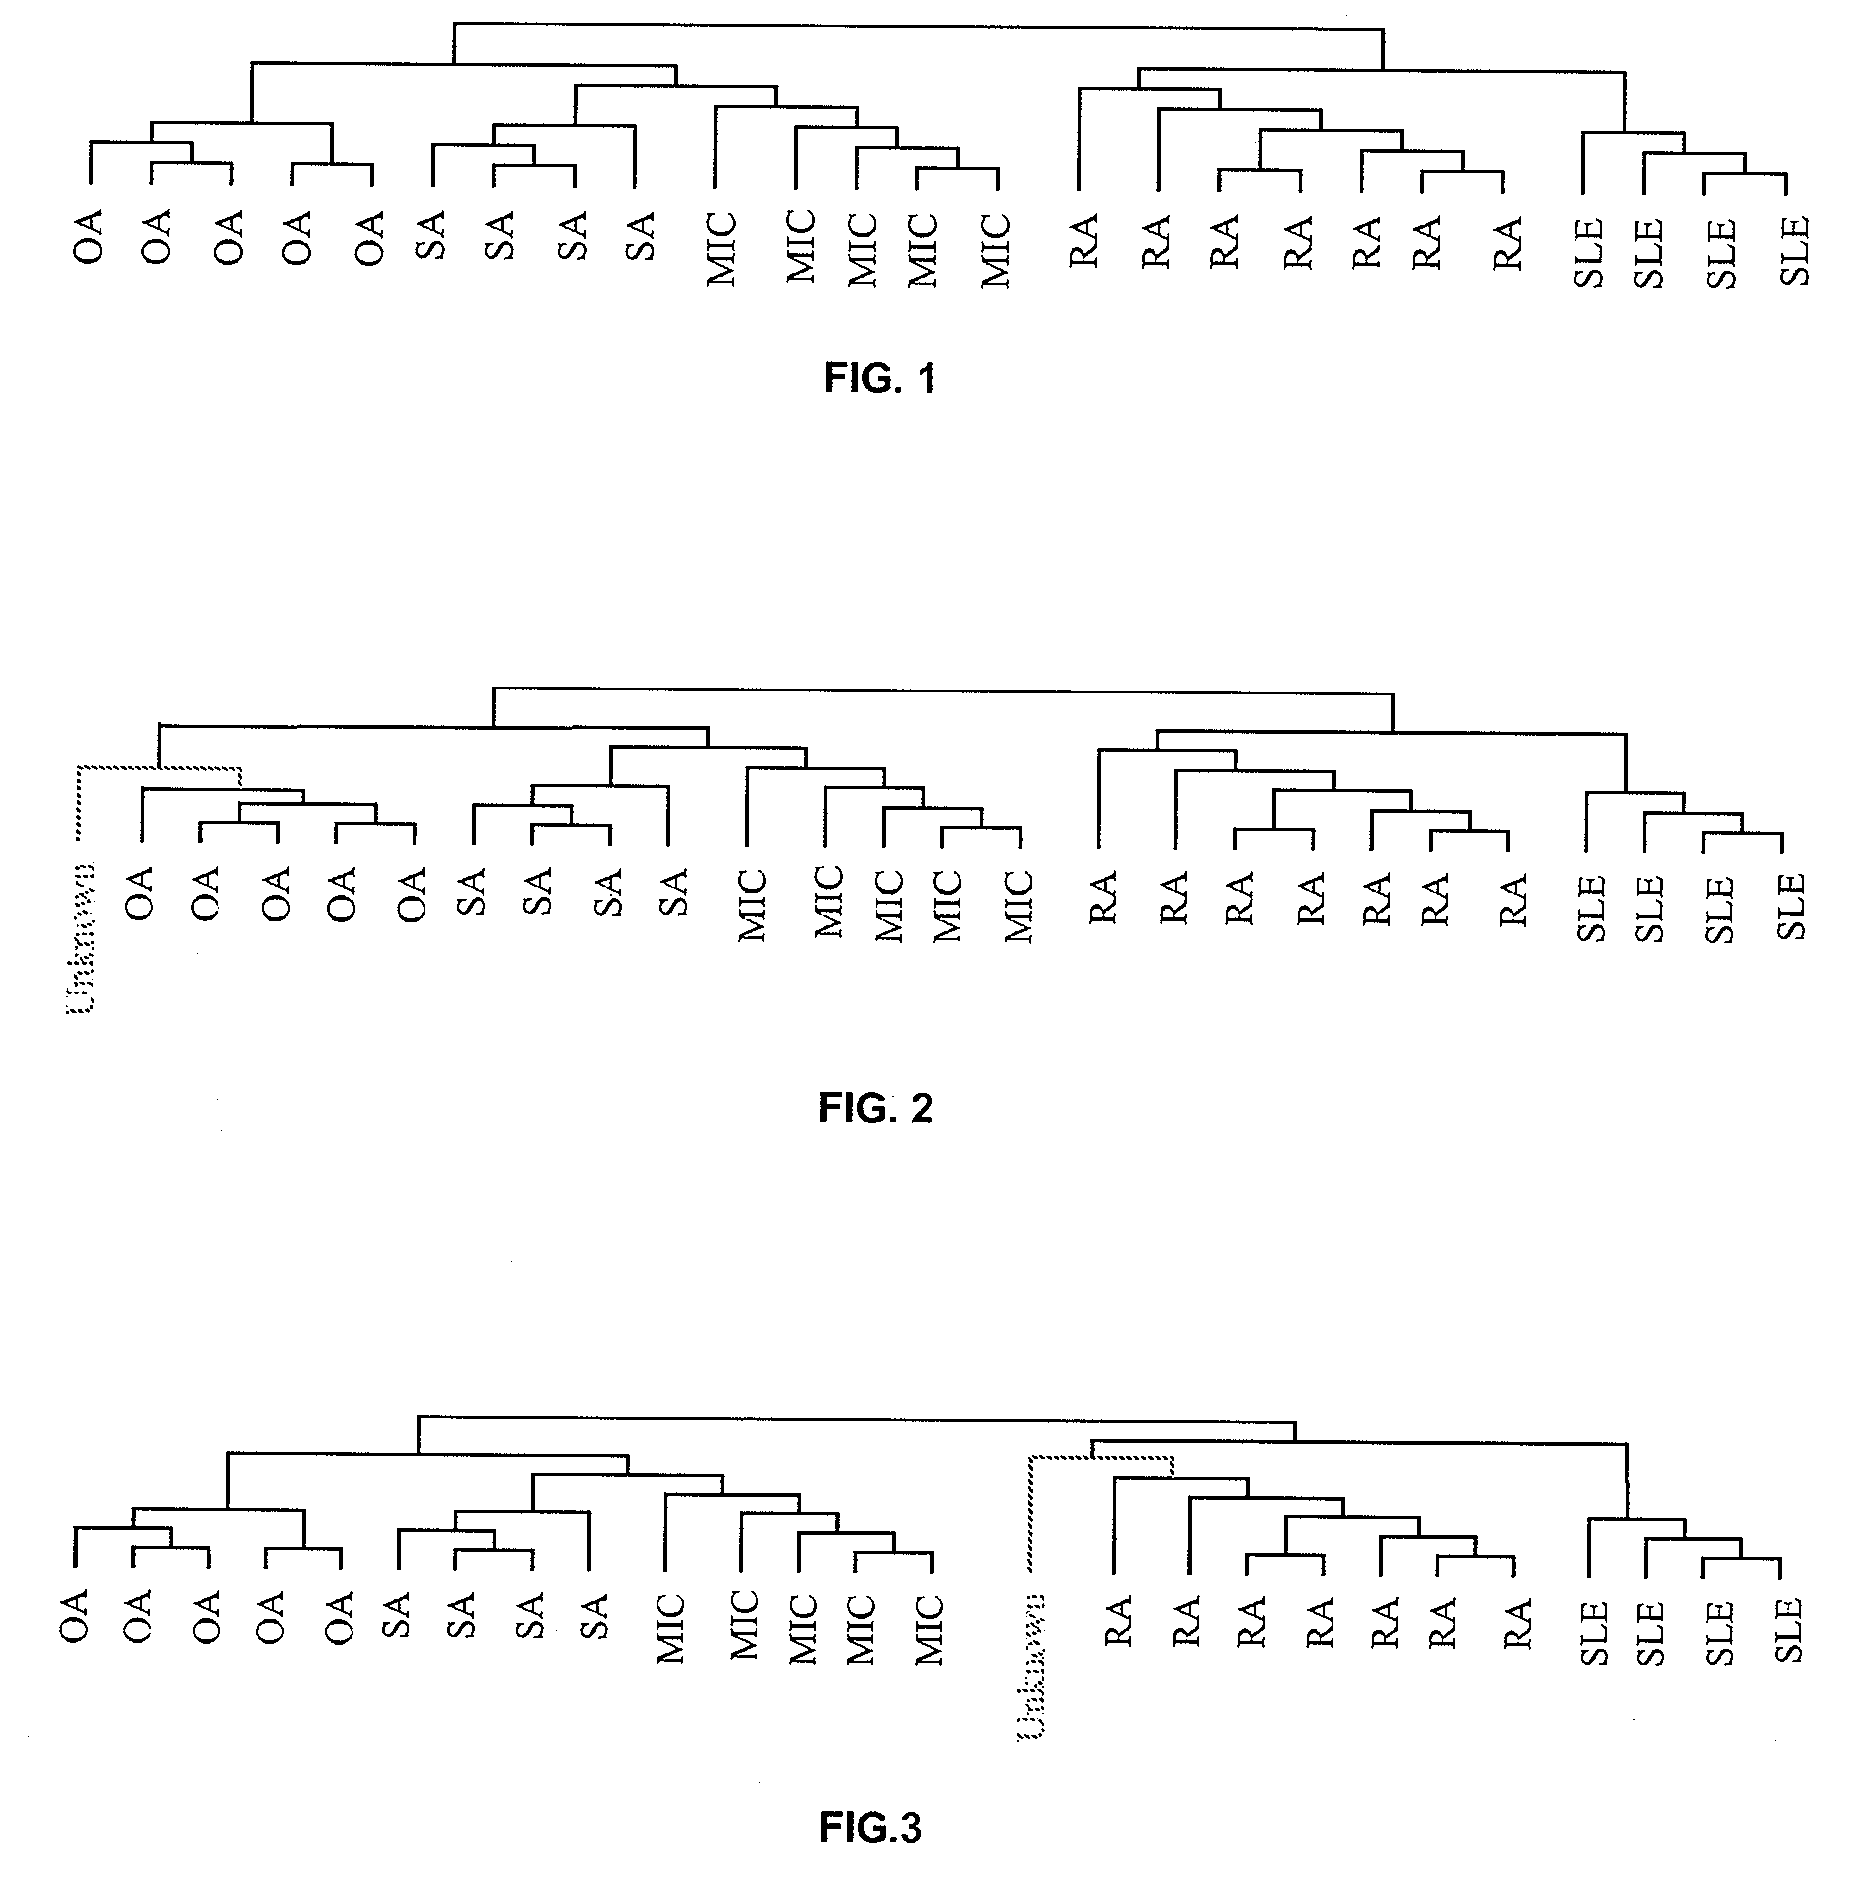 Method for the determination and the classification of rheumatic conditions